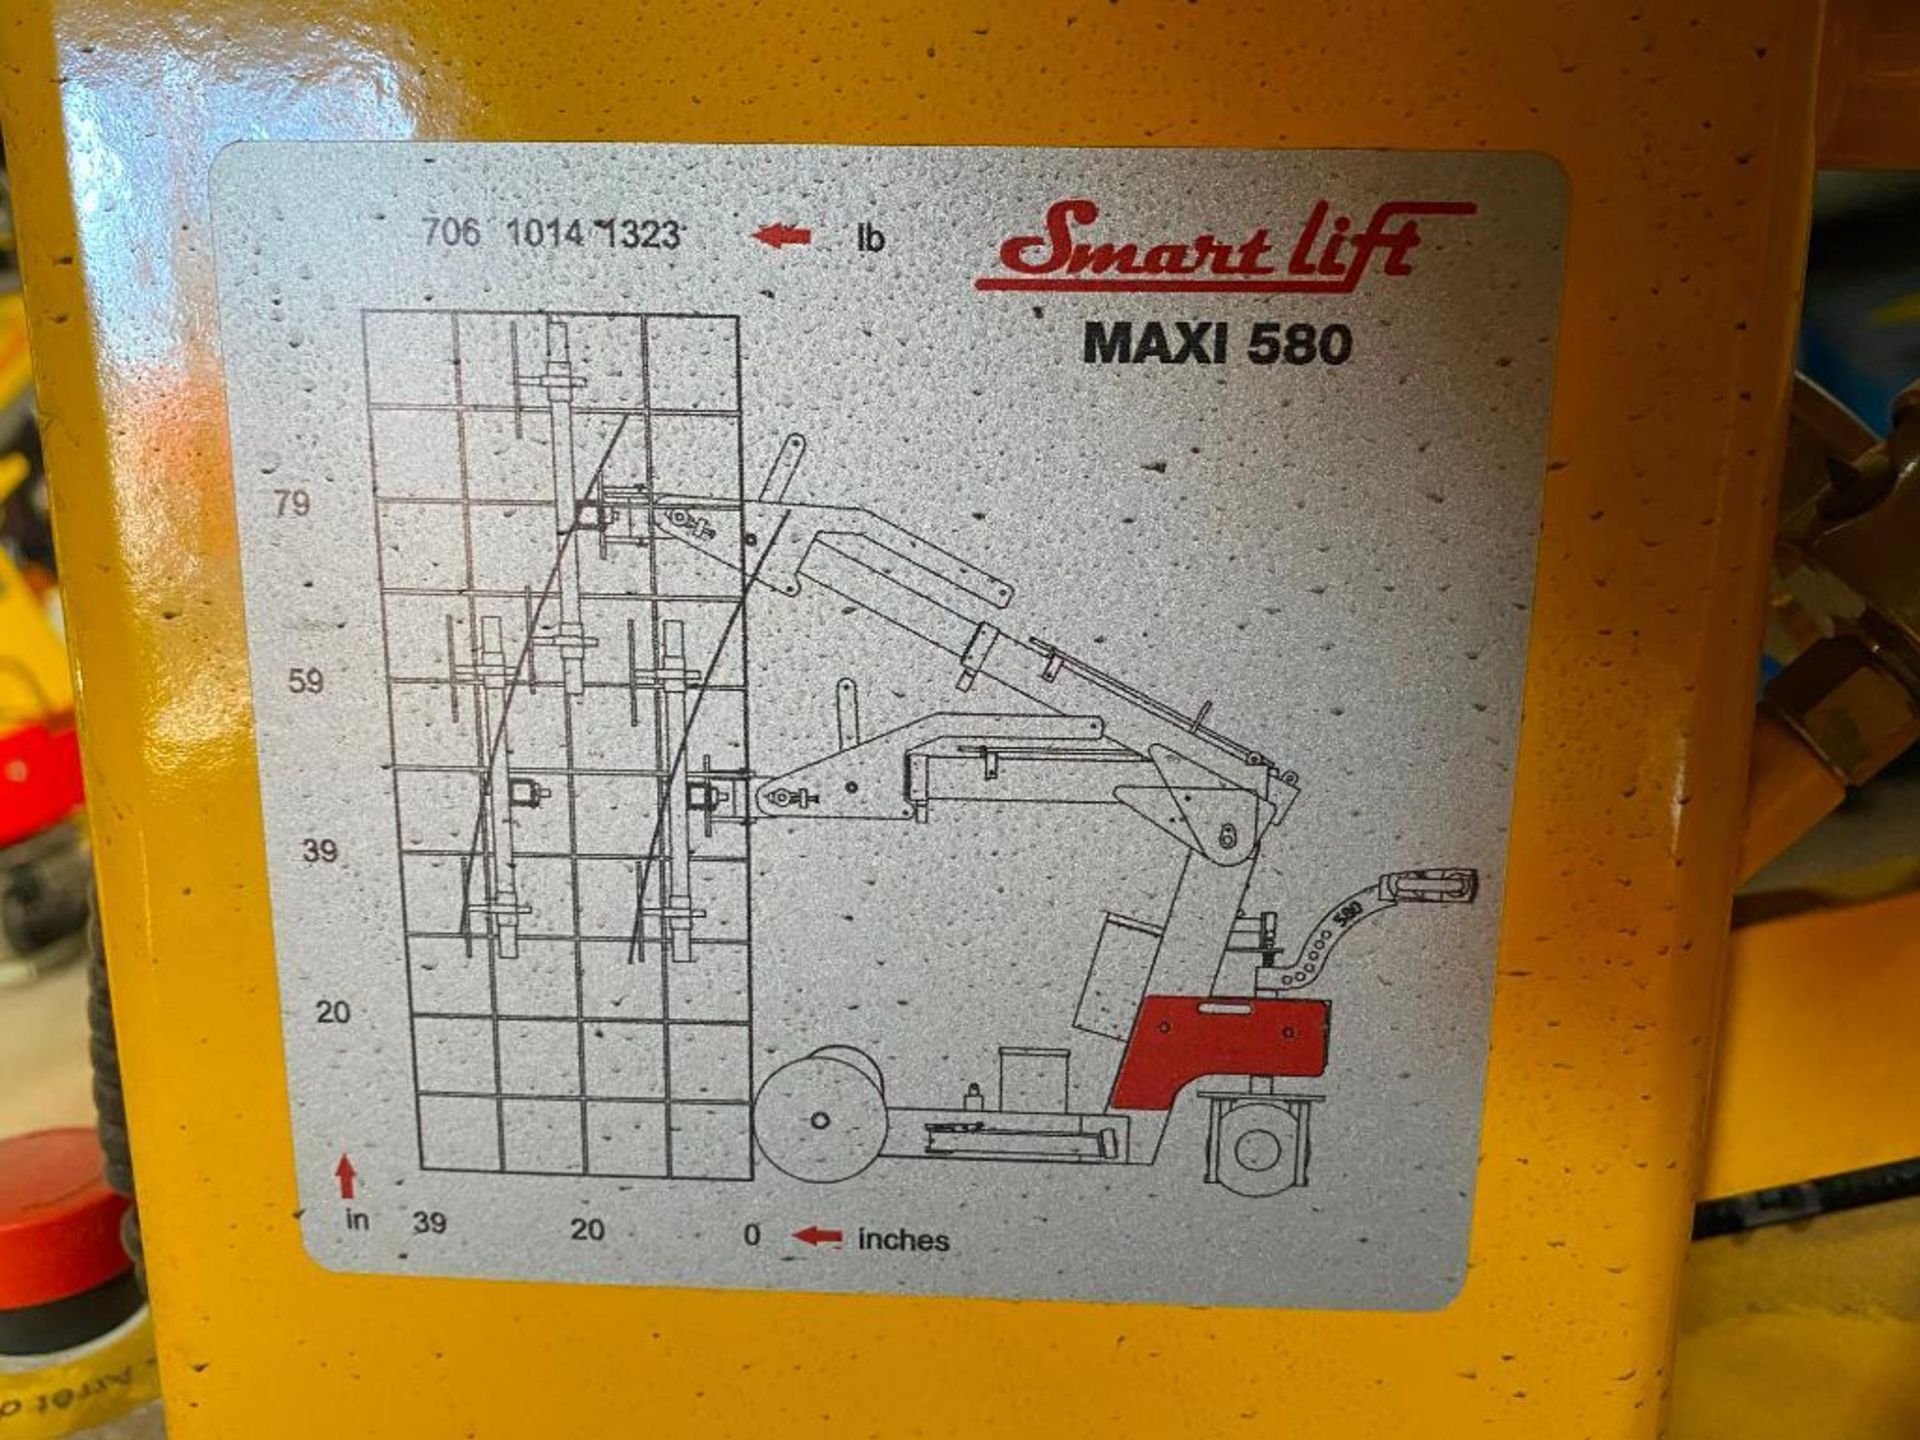 Smart Lift SL 580 Maxi Indoor Panel Lift (S/N 1148, Year 2019), with 1,323 Lb. Lift, 39" Reach, - Image 9 of 10